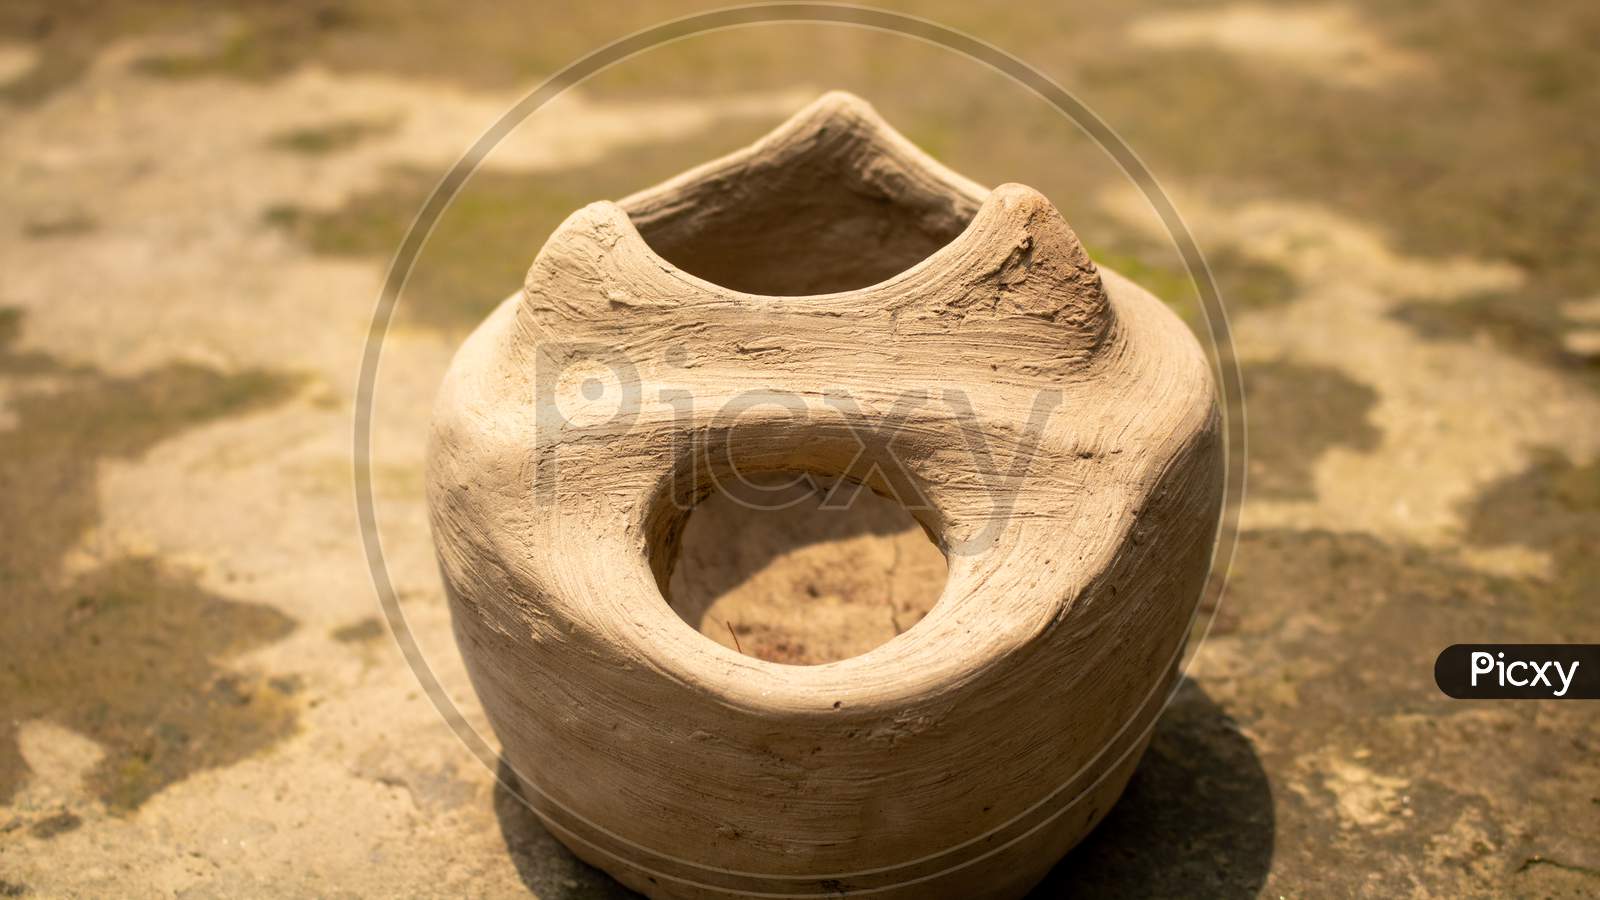 This Is A Handmade Bangladeshi Clay Stove. It Is Used For Cooking In Rural Bengal. The Image Highlights The Heritage Of The Village.